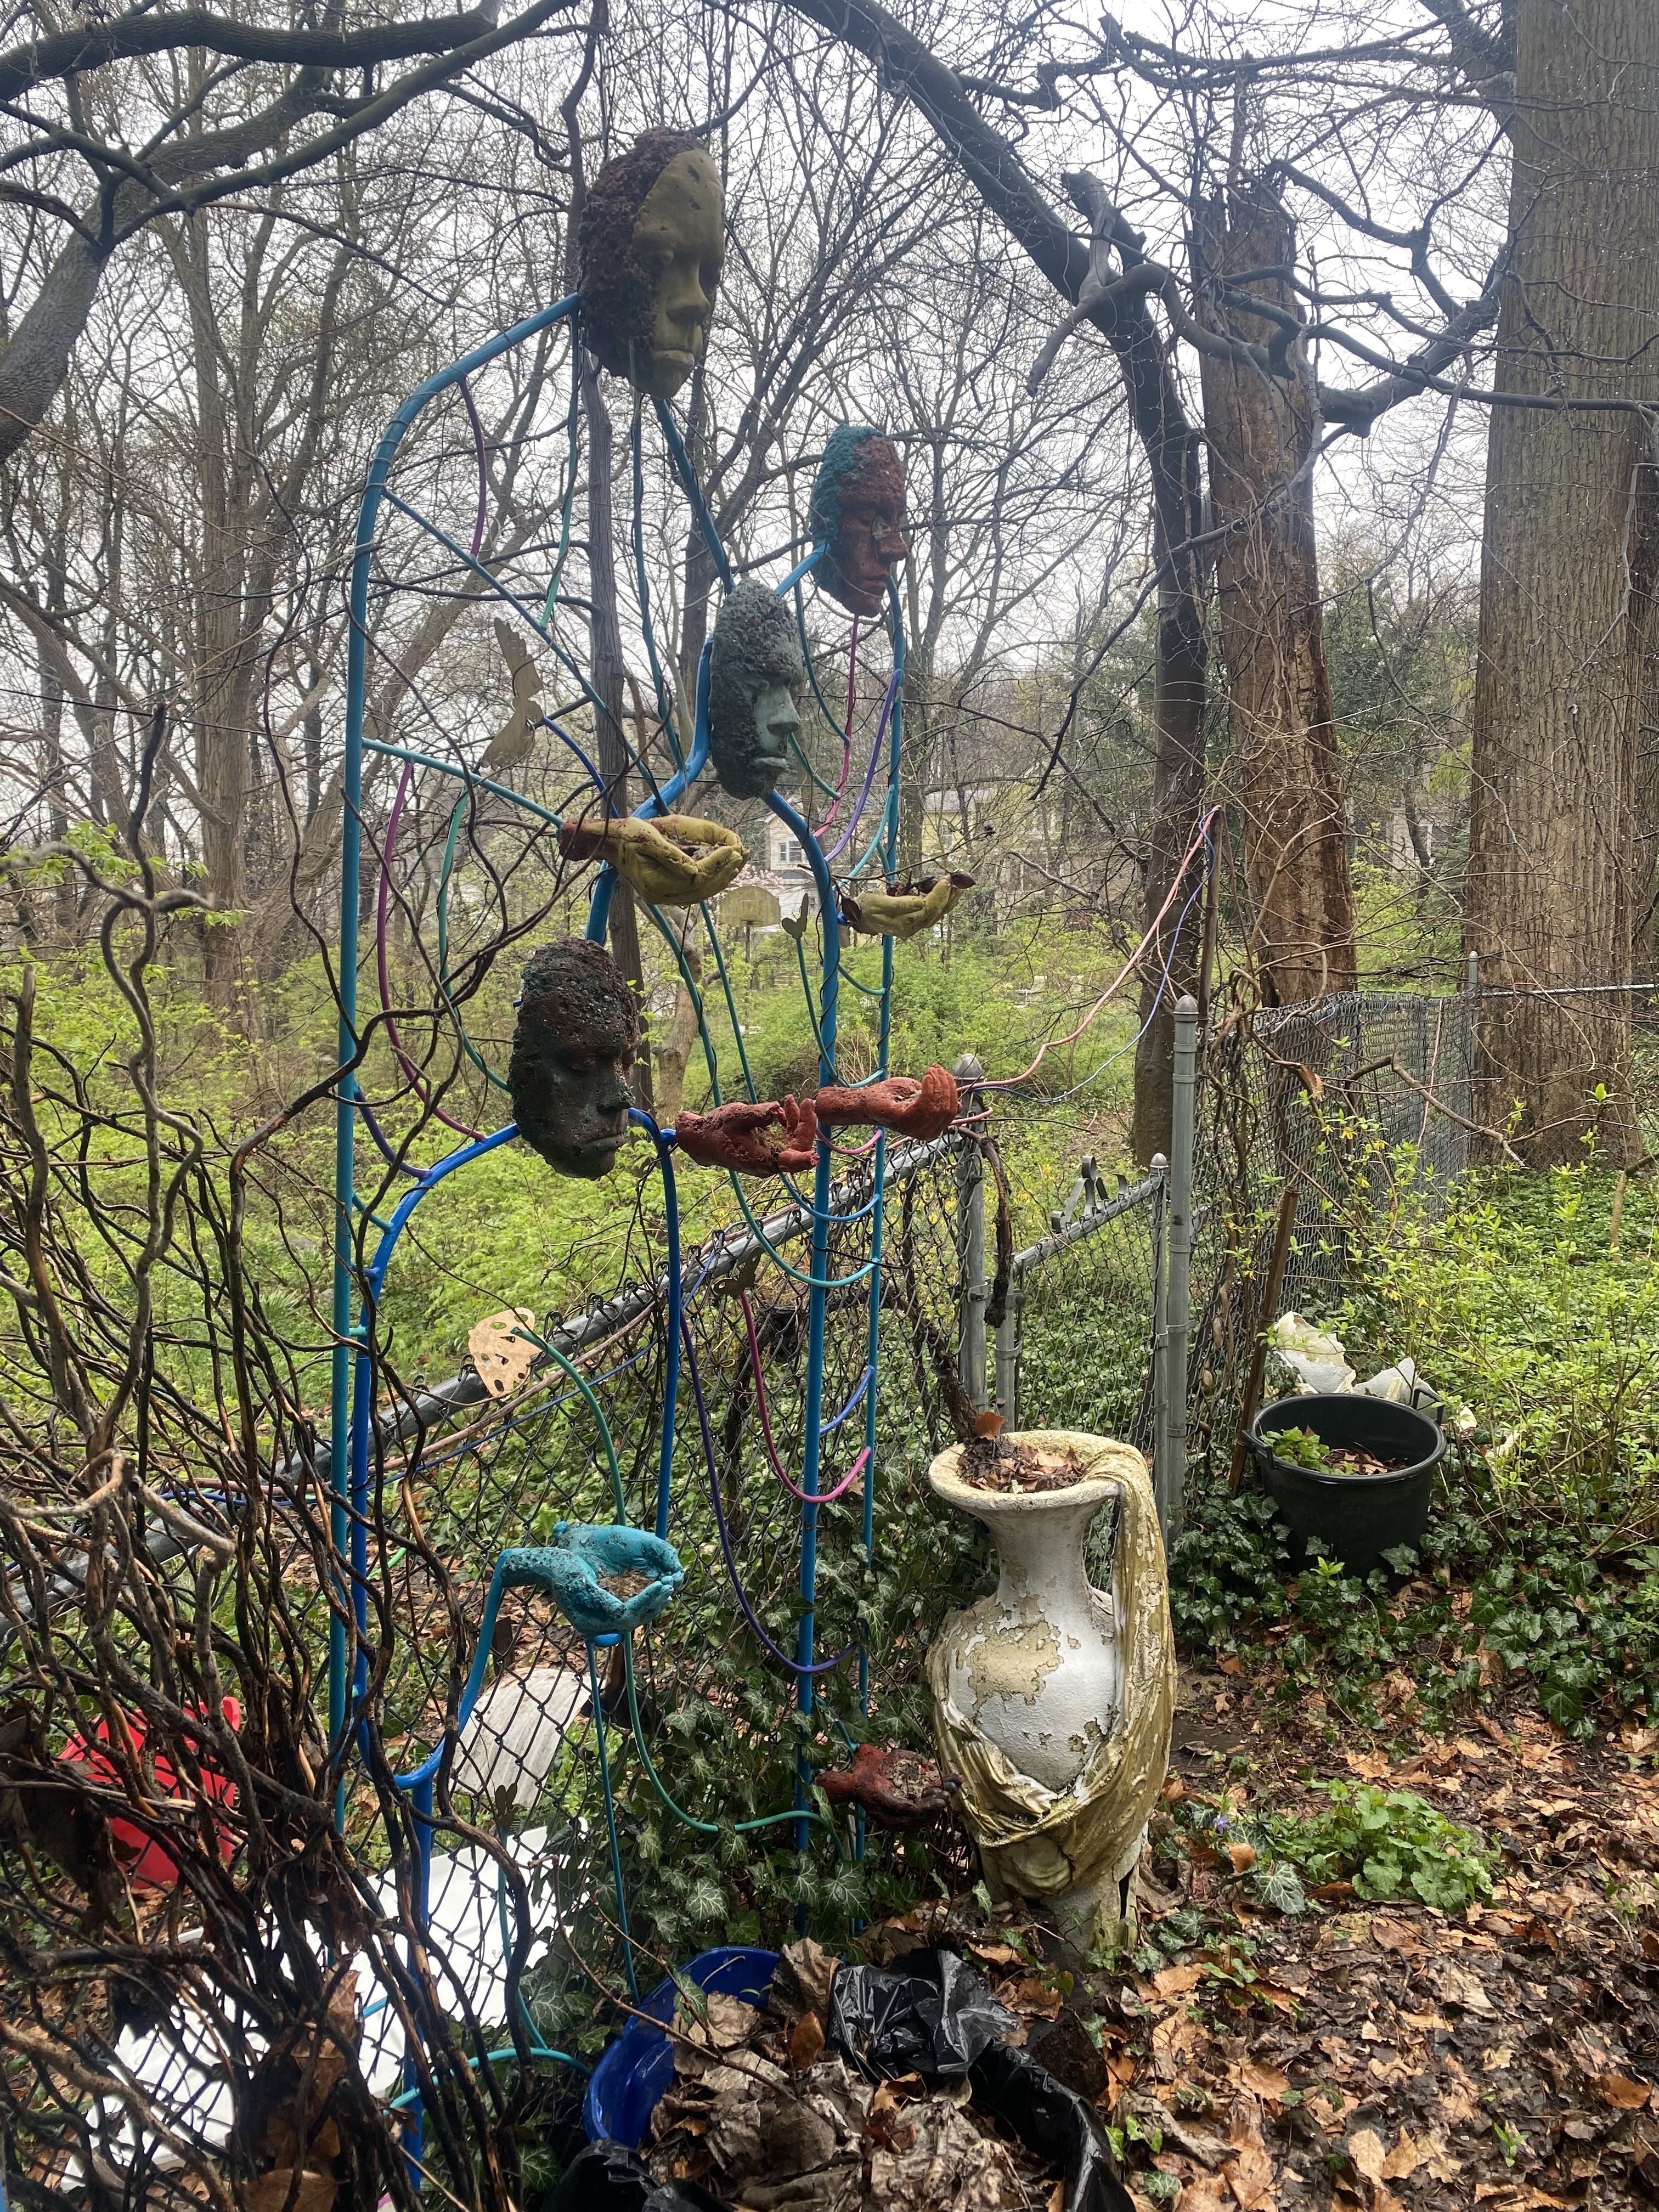 Sculptural human faces and hands are arranged vertically on a trellis in a damp garden.